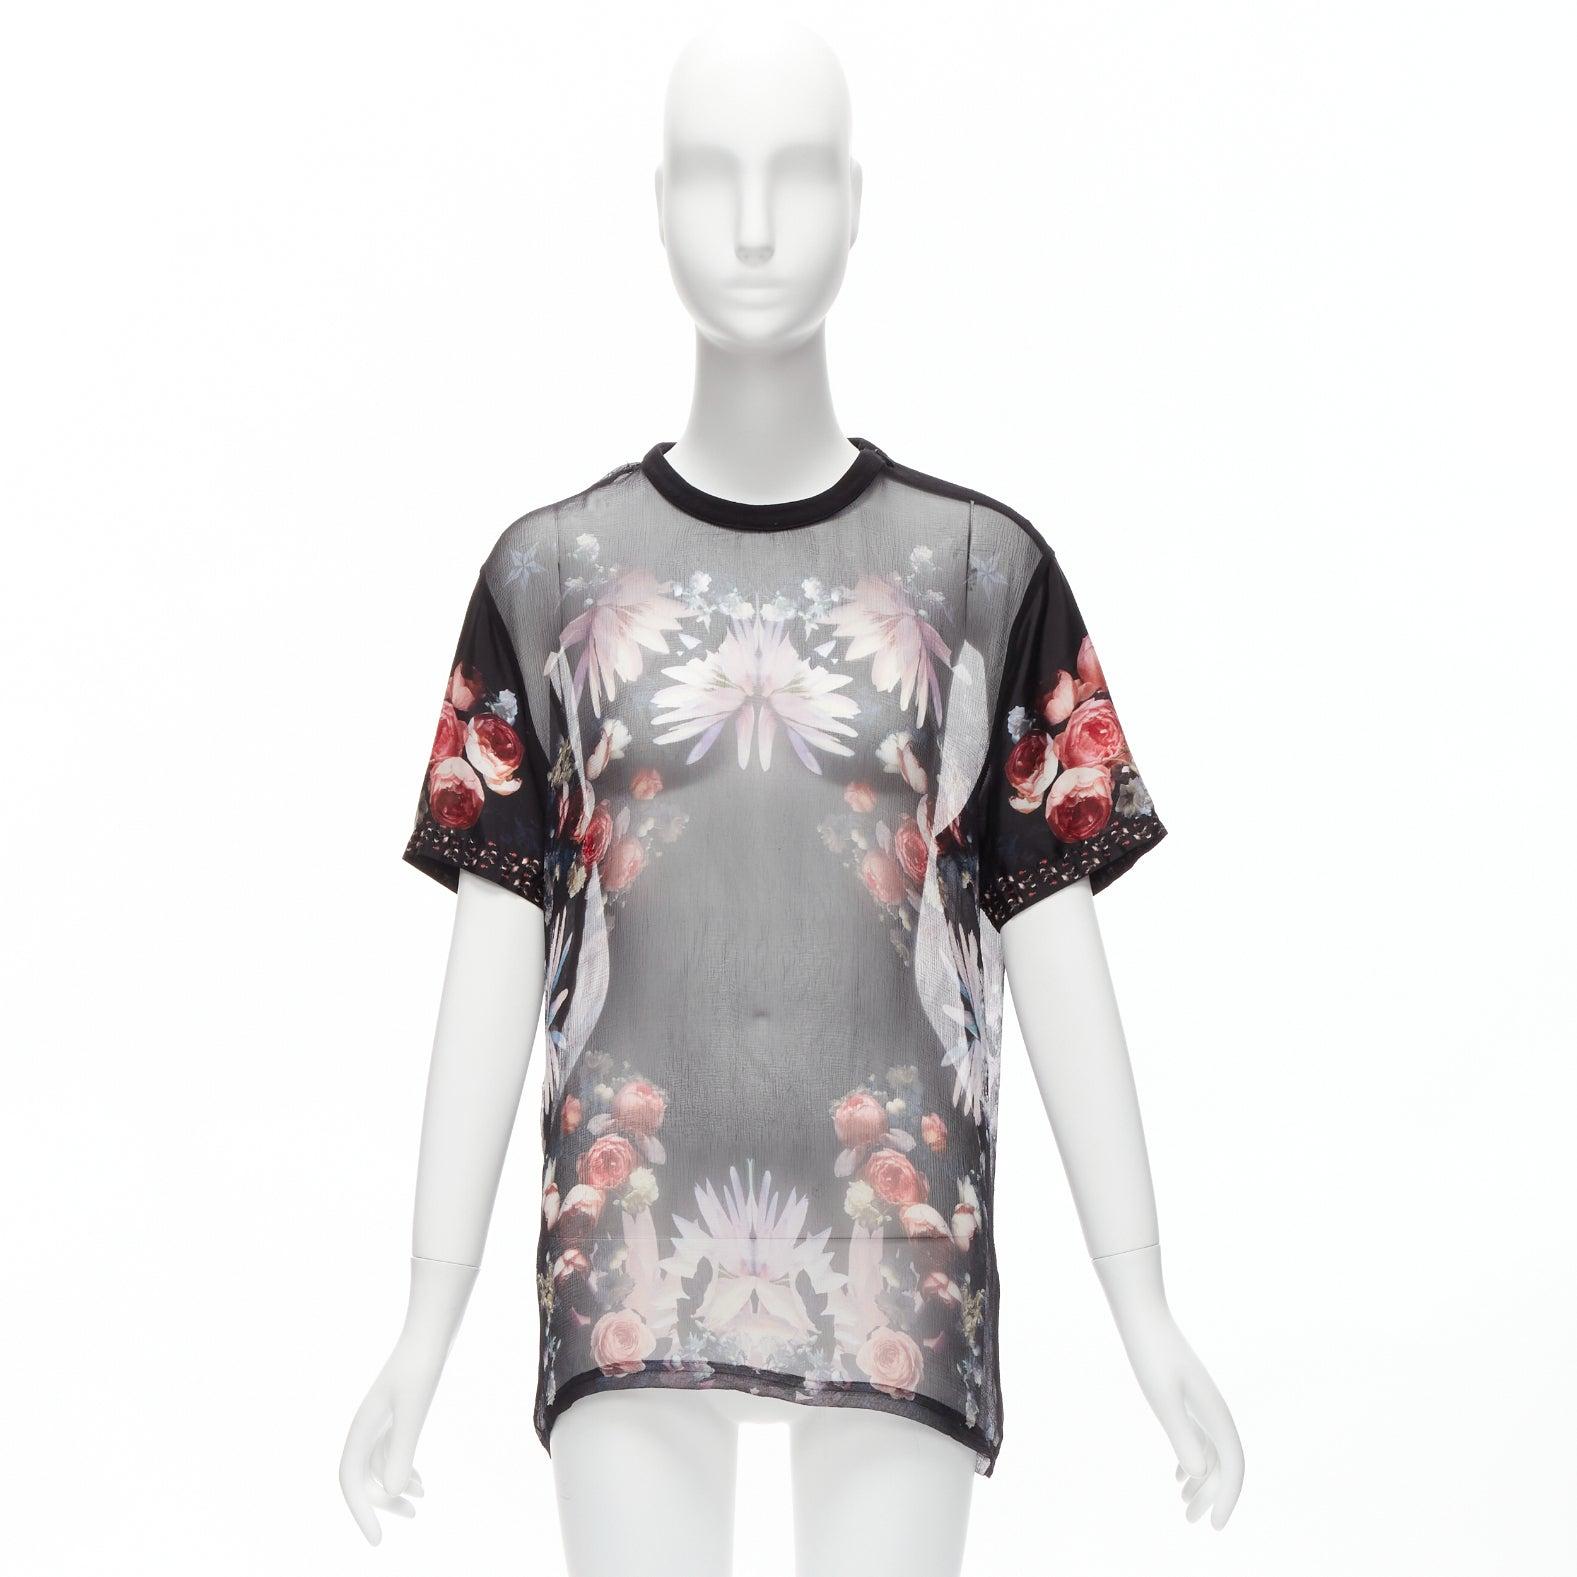 GIVENCHY RICCARDO TISCI red black floral sheer romantic goth tshirt FR34 XS For Sale 4